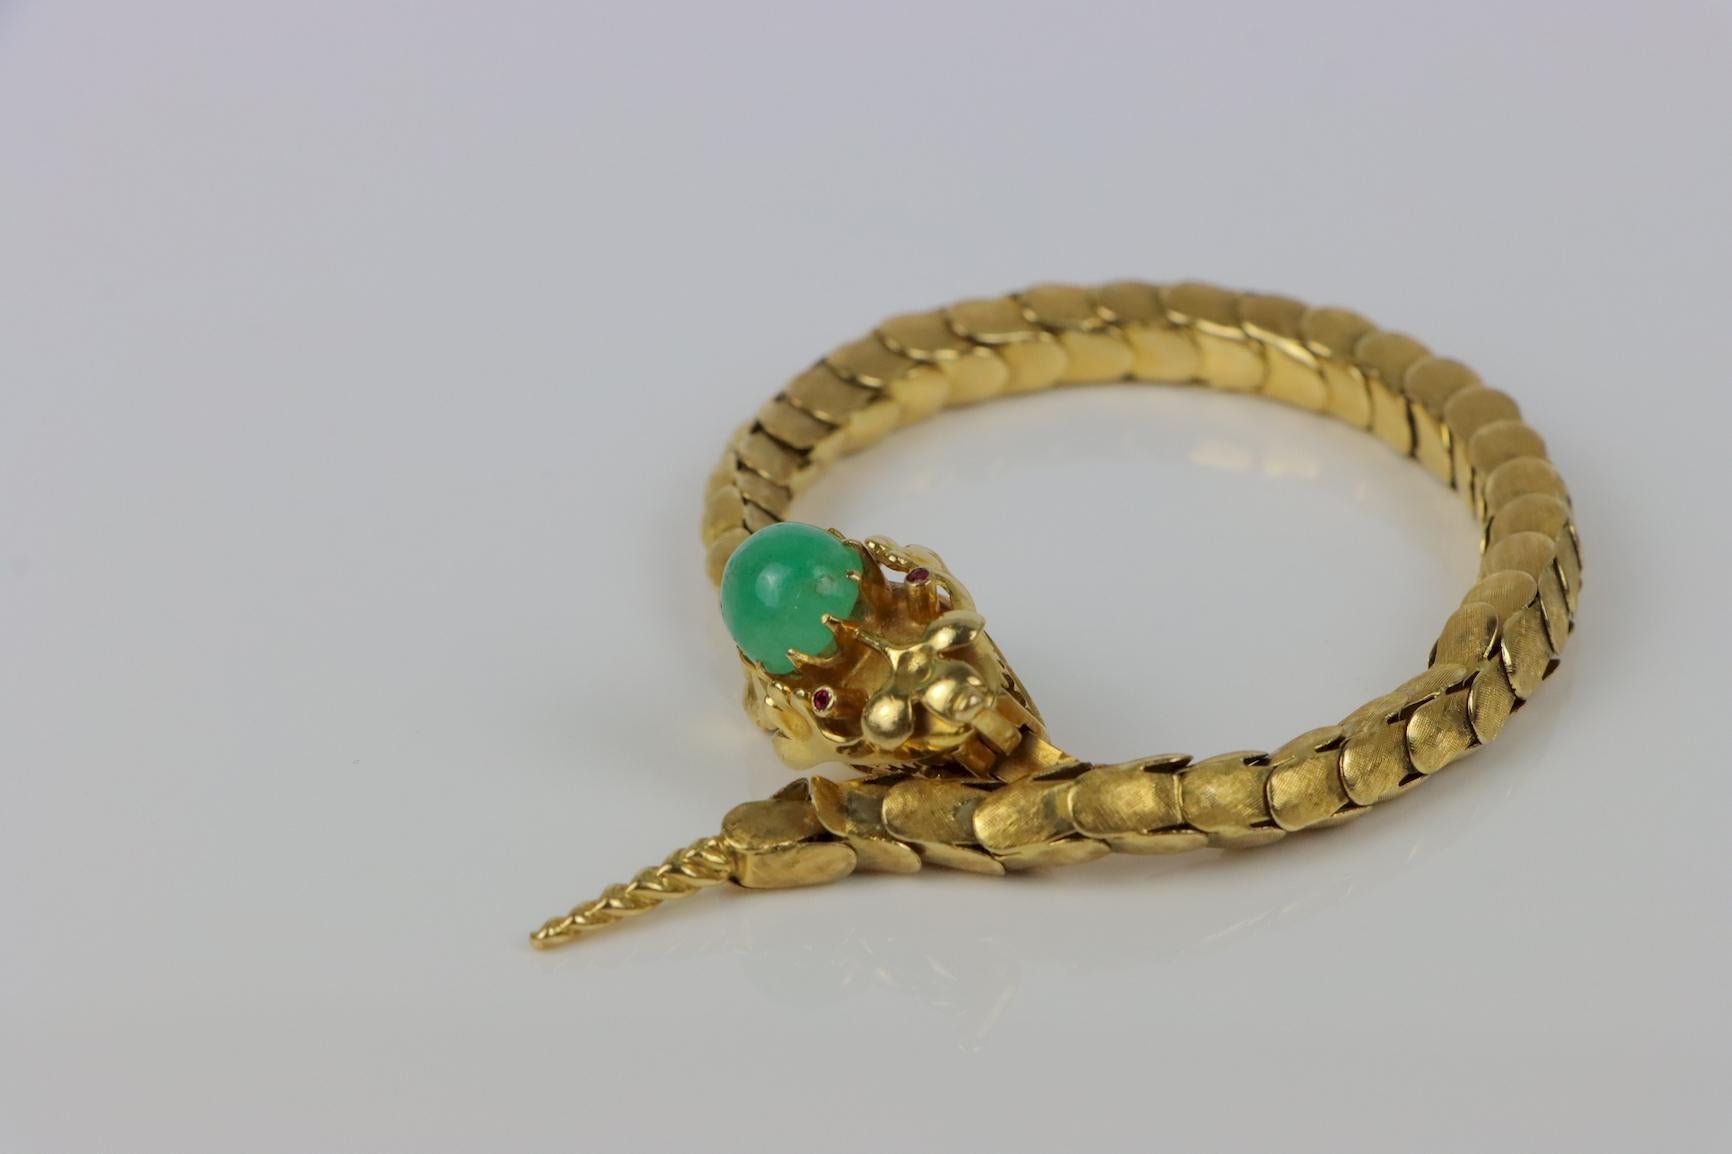 Vintage 18K Gold Reticulated Snake Bracelet In Good Condition For Sale In Flushing, NY